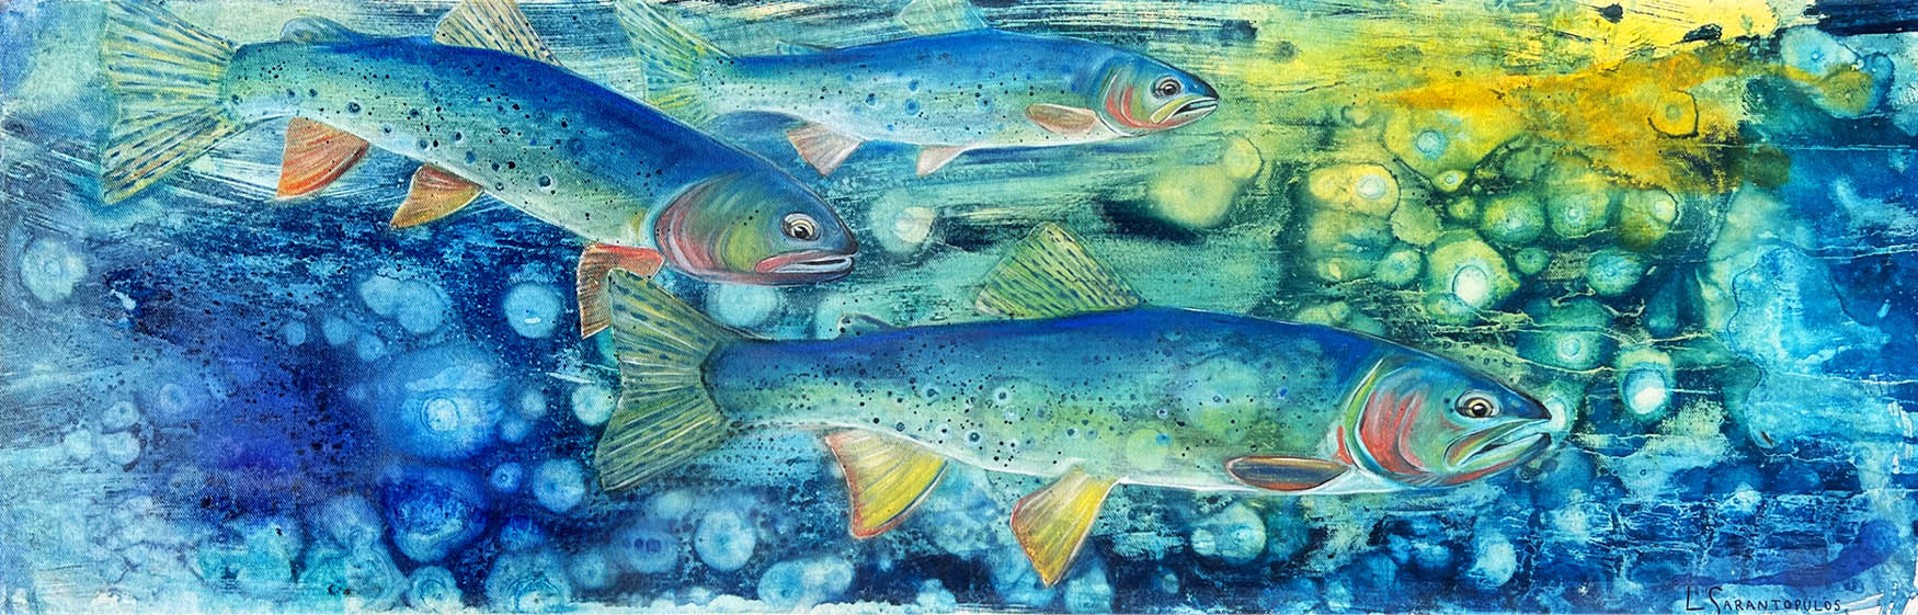 Original Mixed Media Painting Of Swimming Trout With Abstract Cyanotype Background